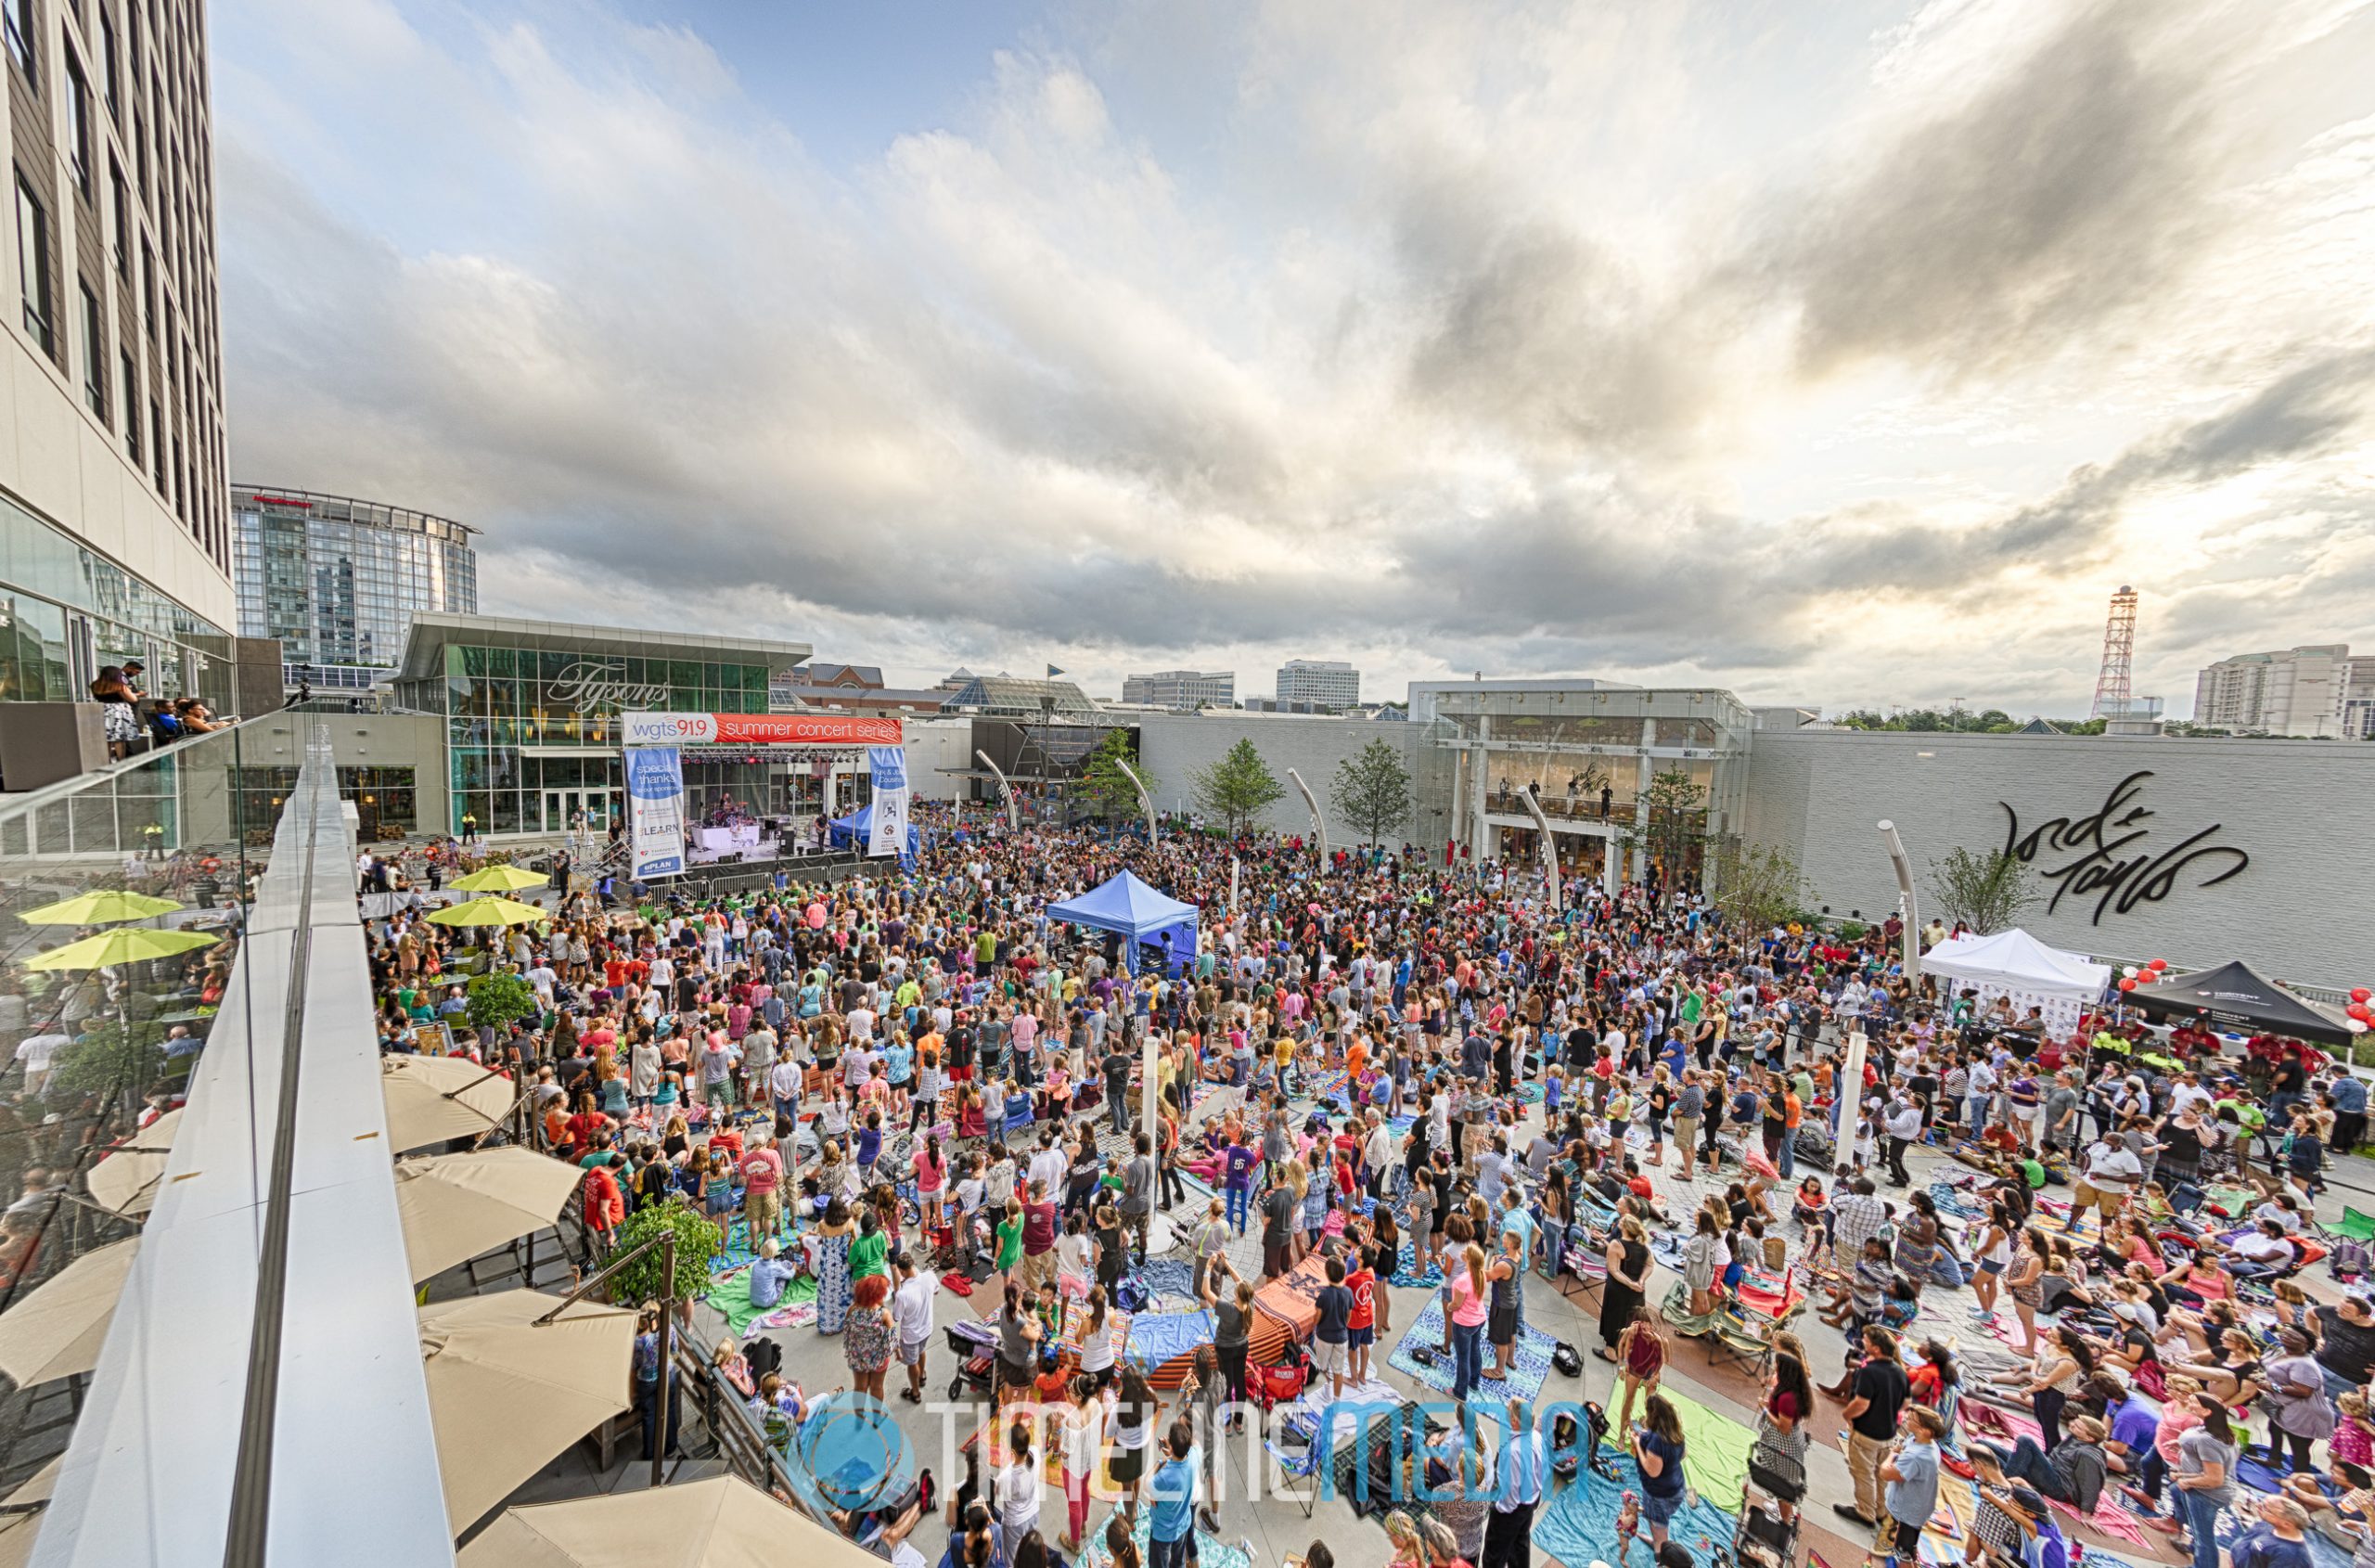 2016 July Concerts - Large crowd on the Plaza at Tysons Corner Center for their Summer Concert Series